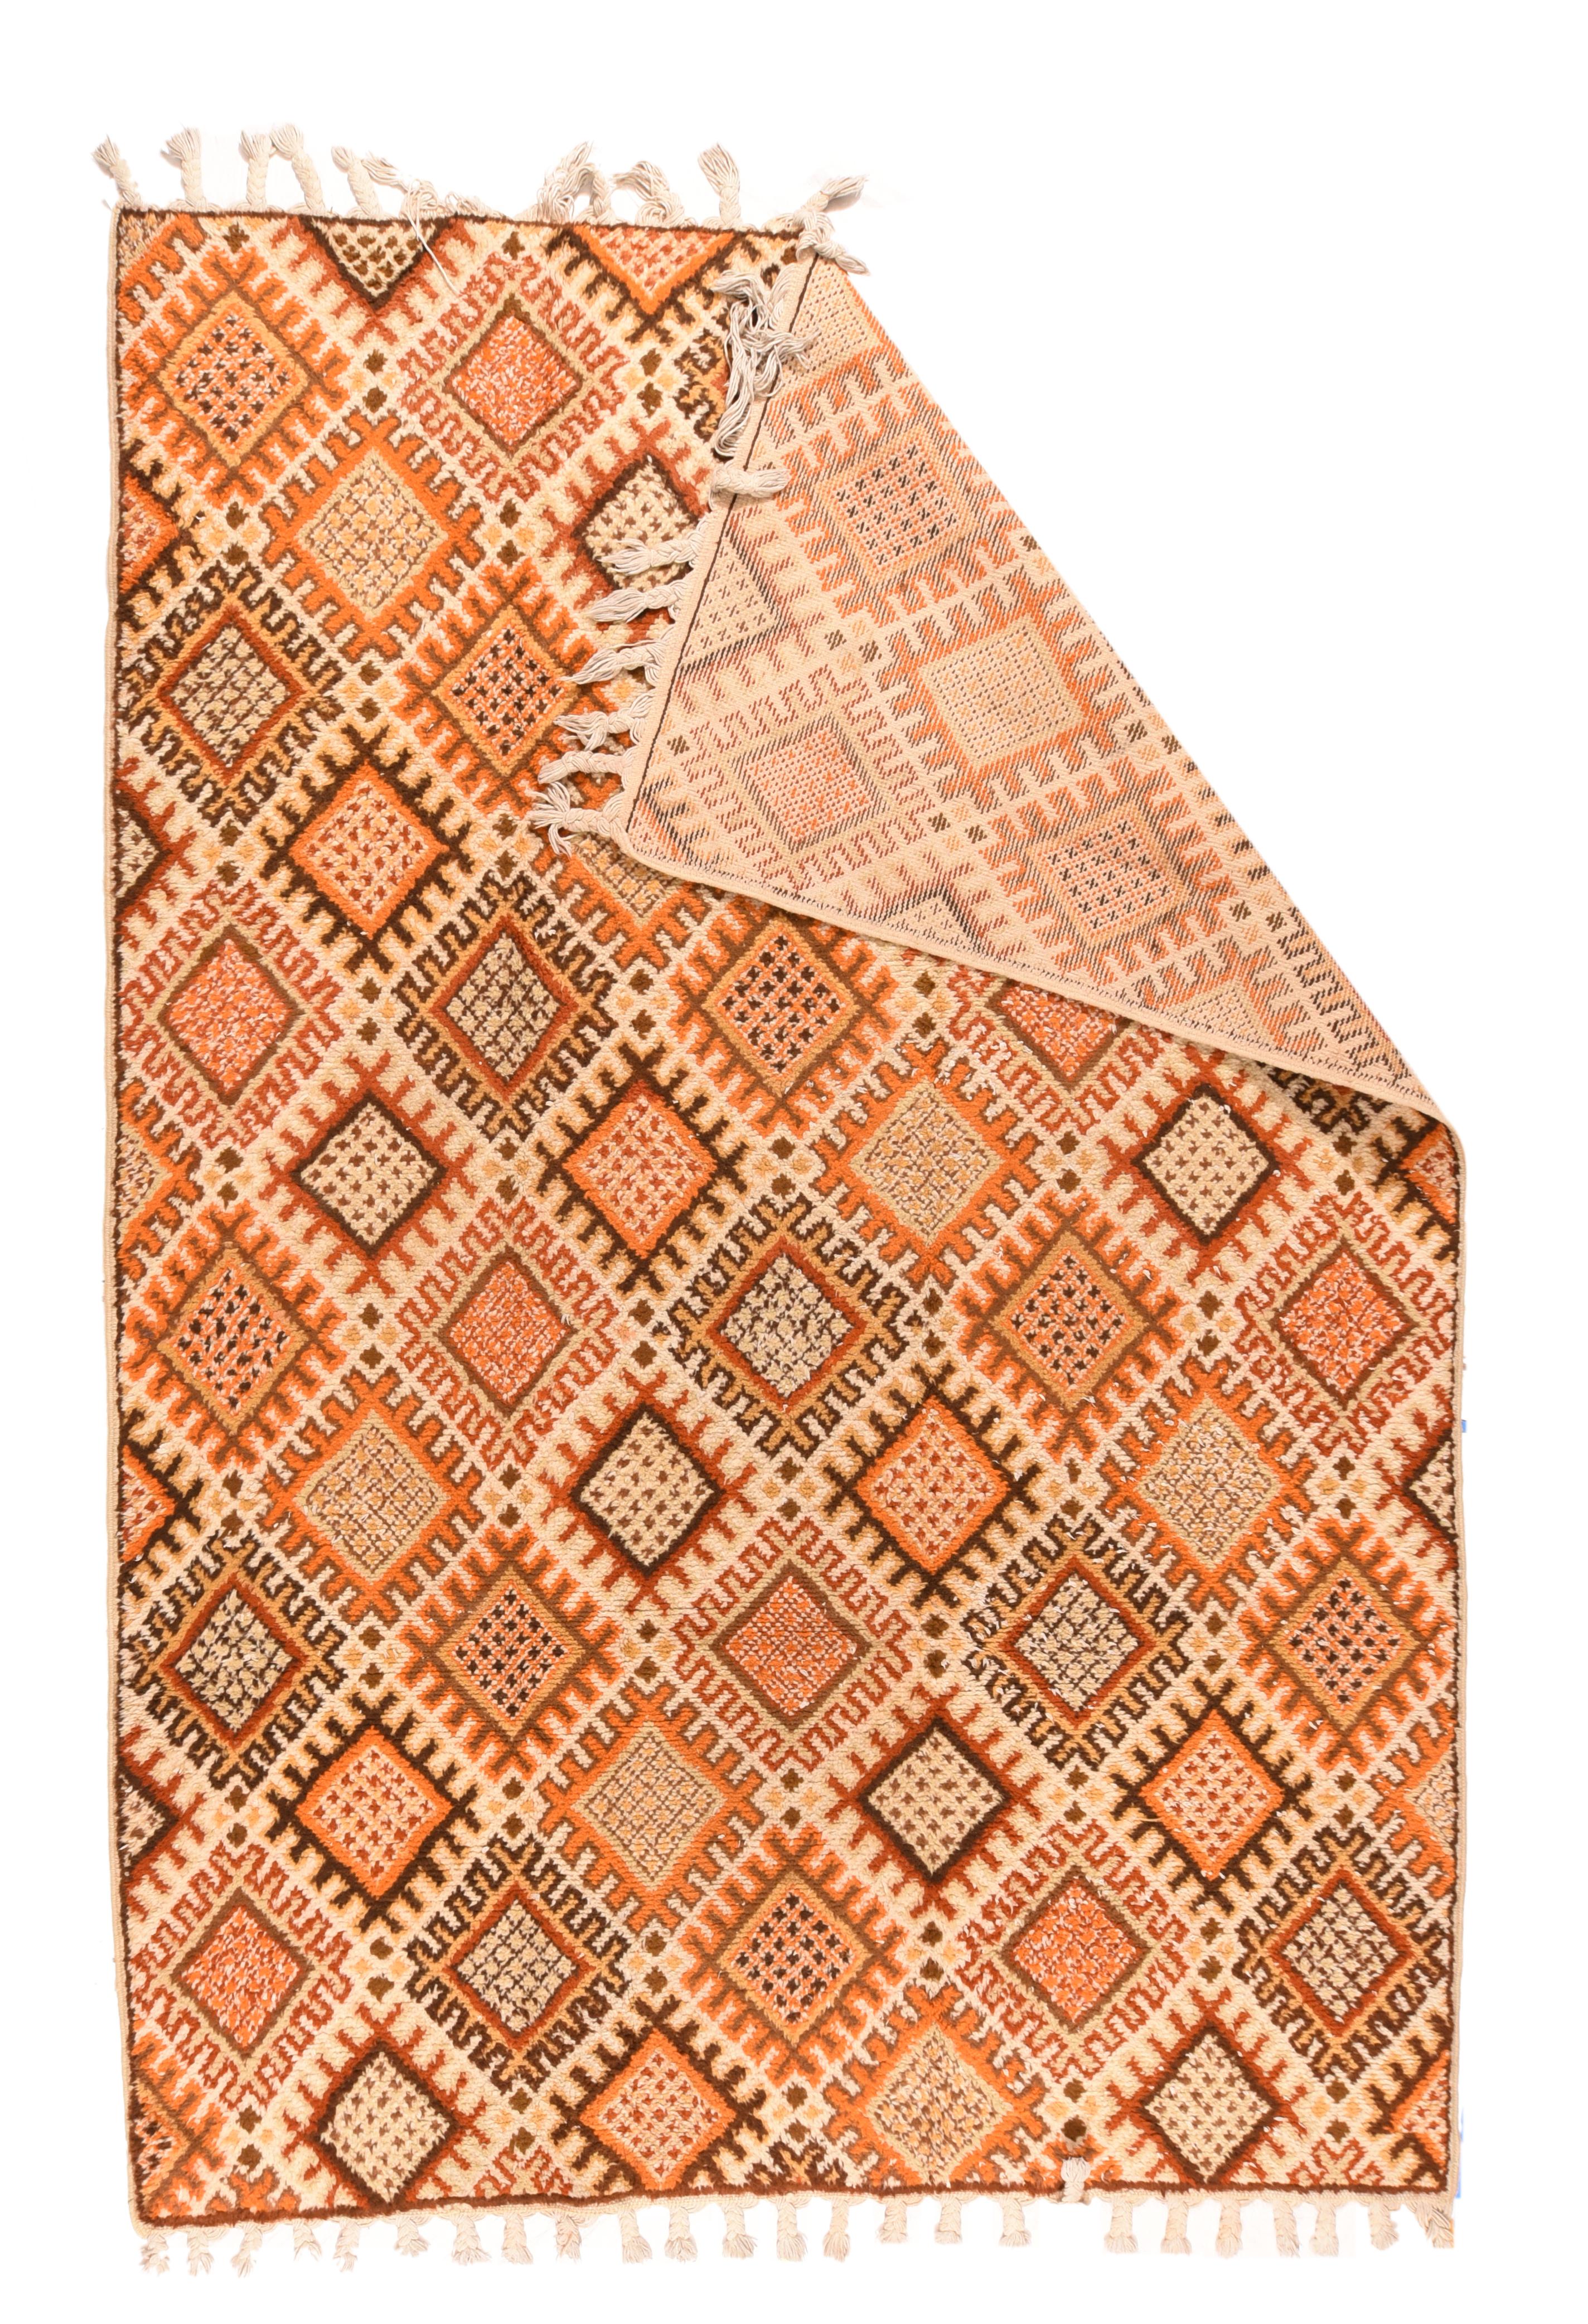 Vintage Moroccan Rug 6'8'' x 9'9''. The lush ecru essentially borderless field is uniformly covered by rayed lozenges with crosshatch centres, in shades of red, straw, goldenrod, tangerine, rust and chocolate. Cotton foundation. Both ends with